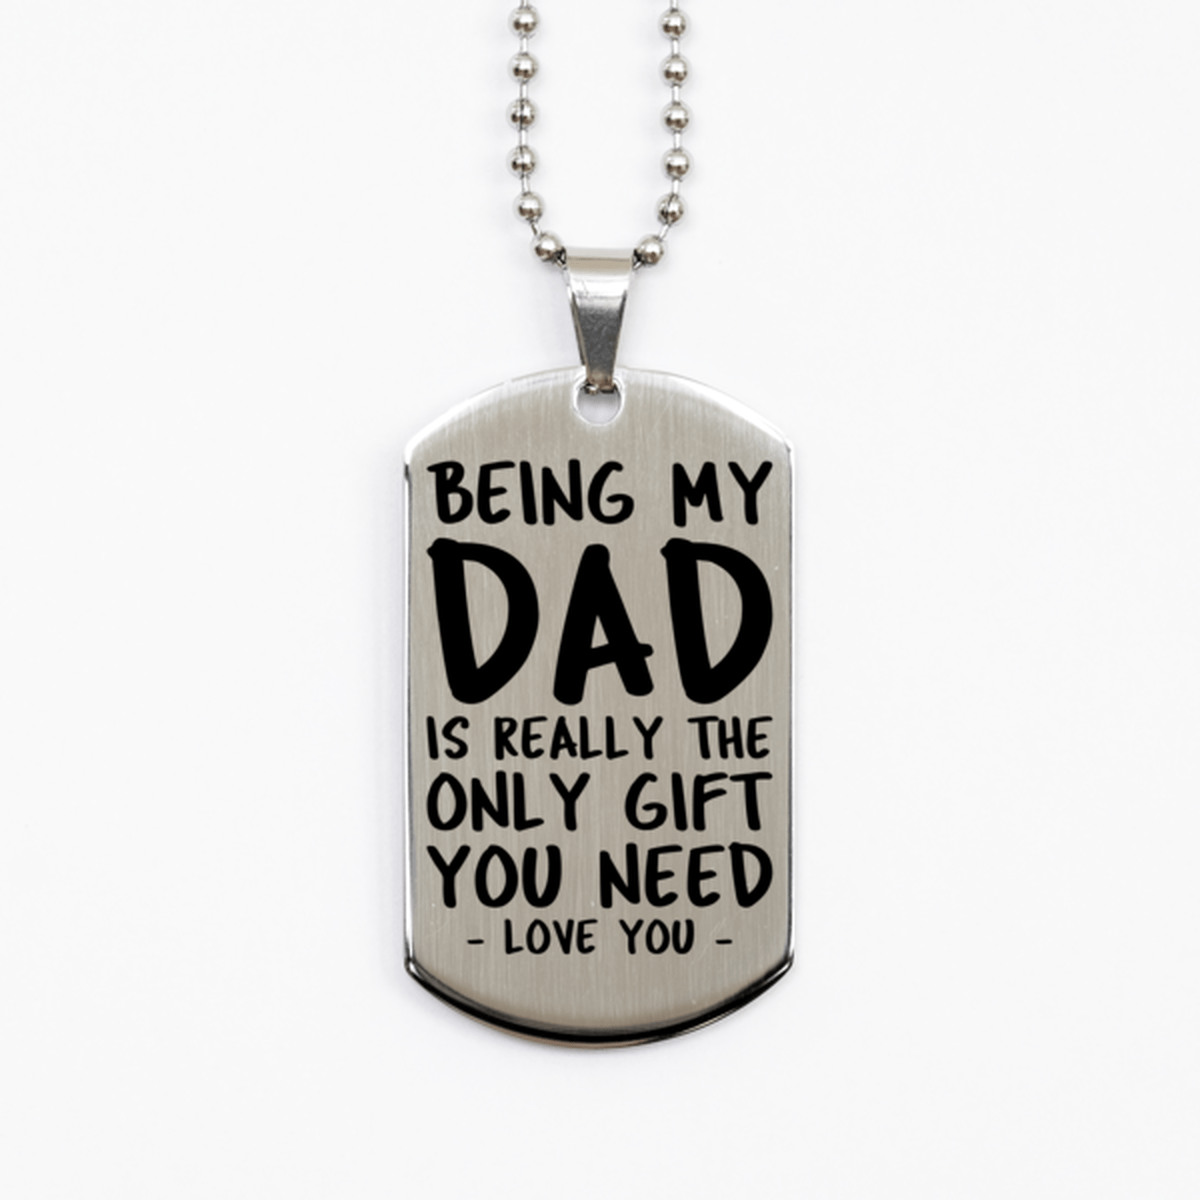 Funny Dad Silver Dog Tag Necklace, Being My Dad Is Really the Only Gift You Need, Best Birthday Gifts for Dad